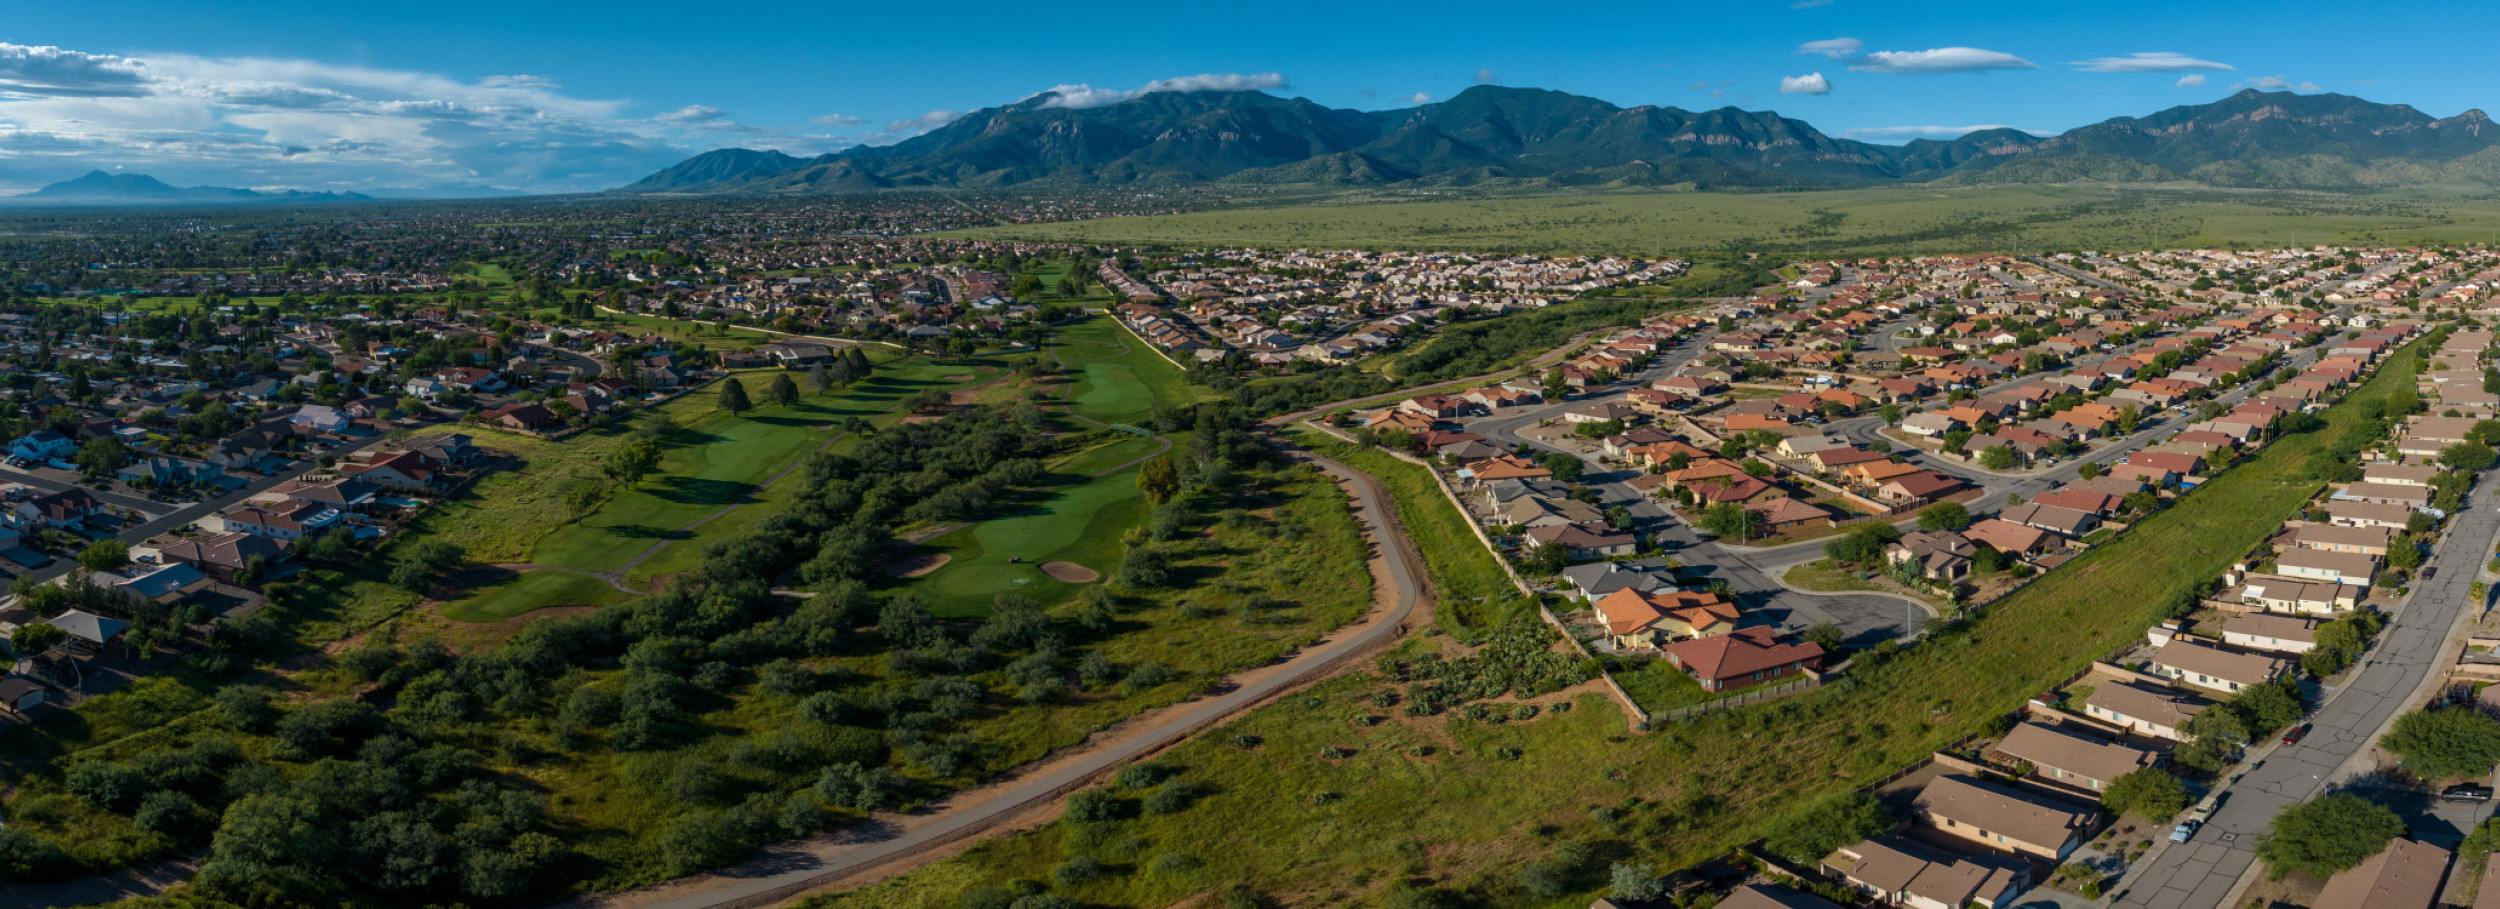 aerial view of neighborhood in cochise county